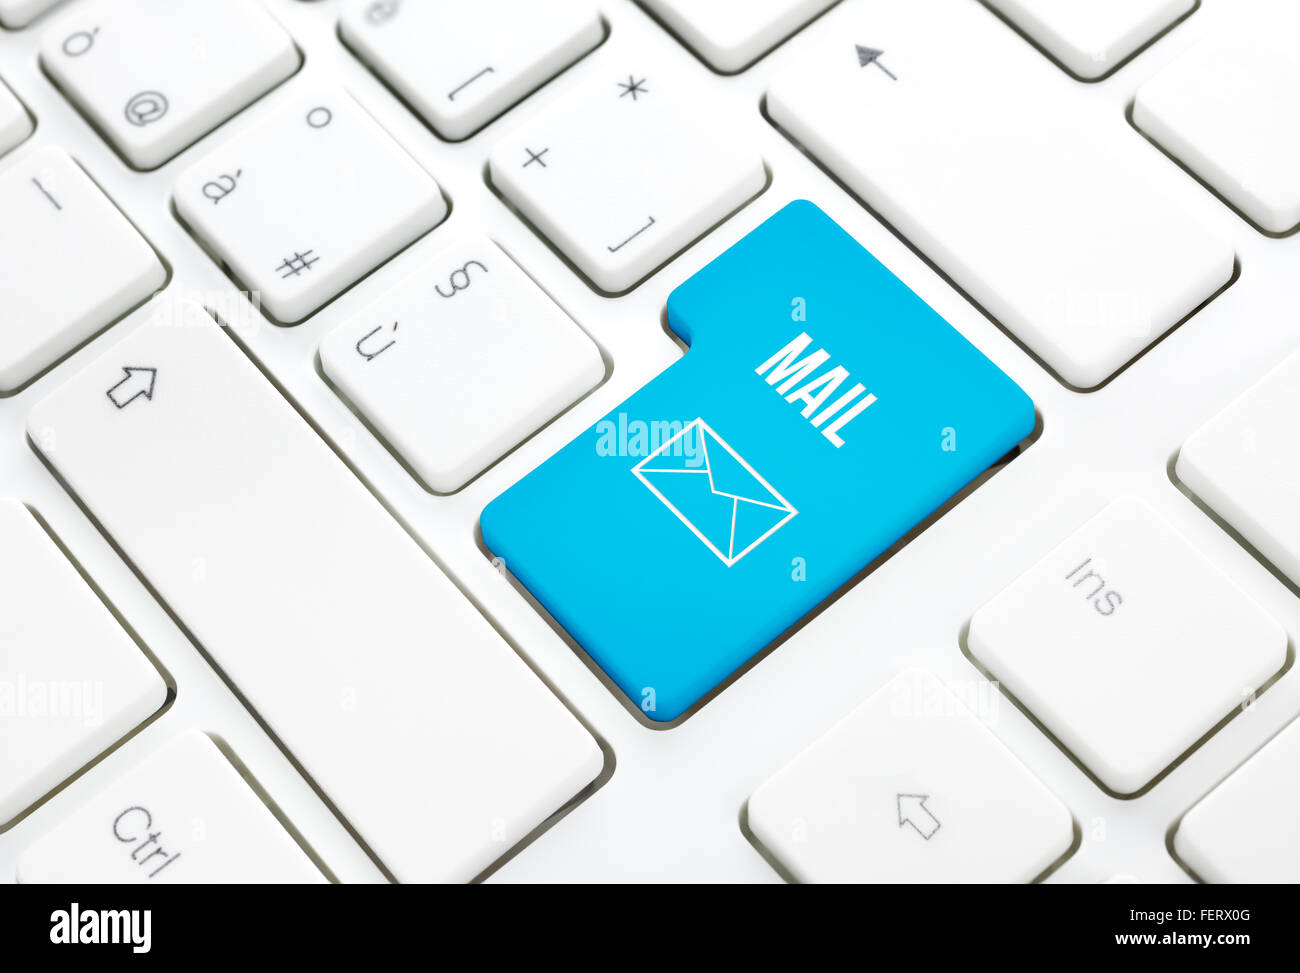 Web Mail network business concept, blue enter button or key on white keyboard photography. Stock Photo